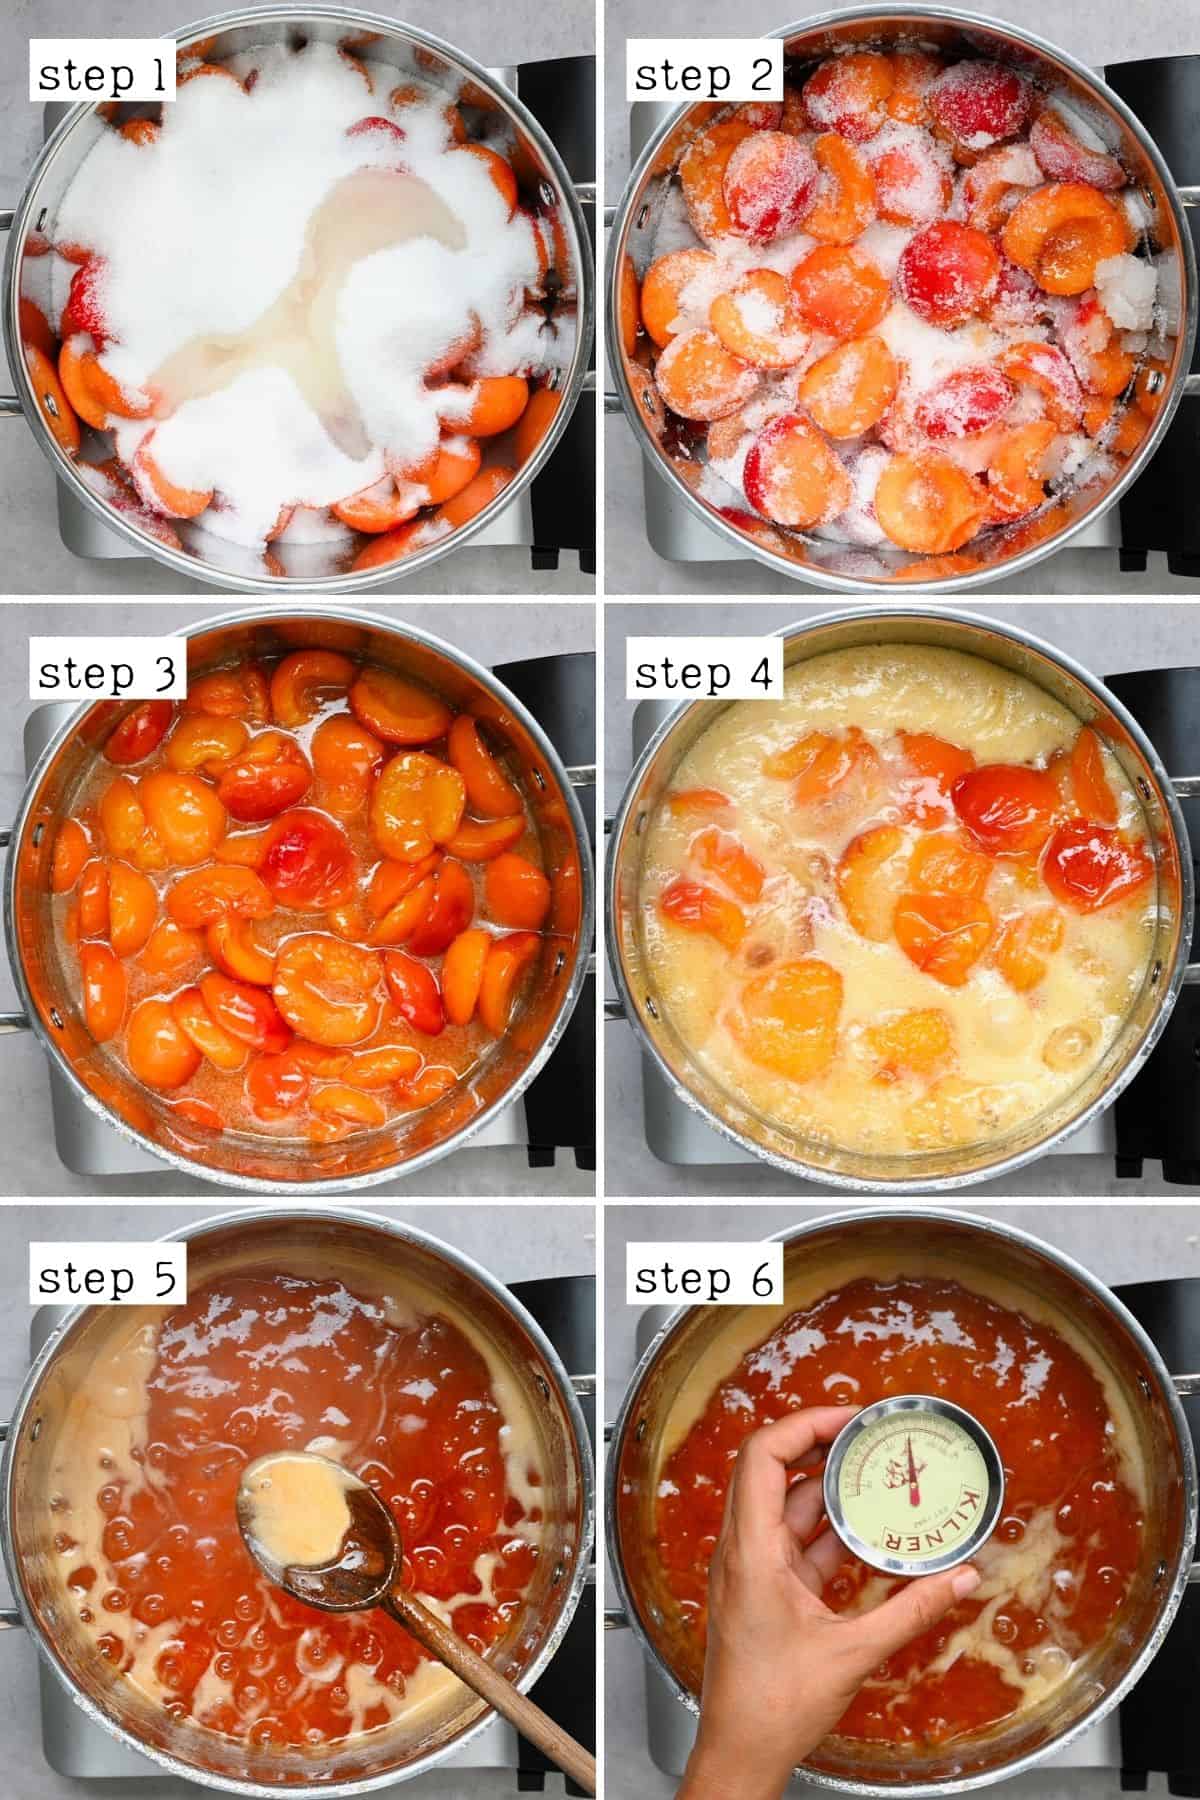 Steps for cooking apricot jam